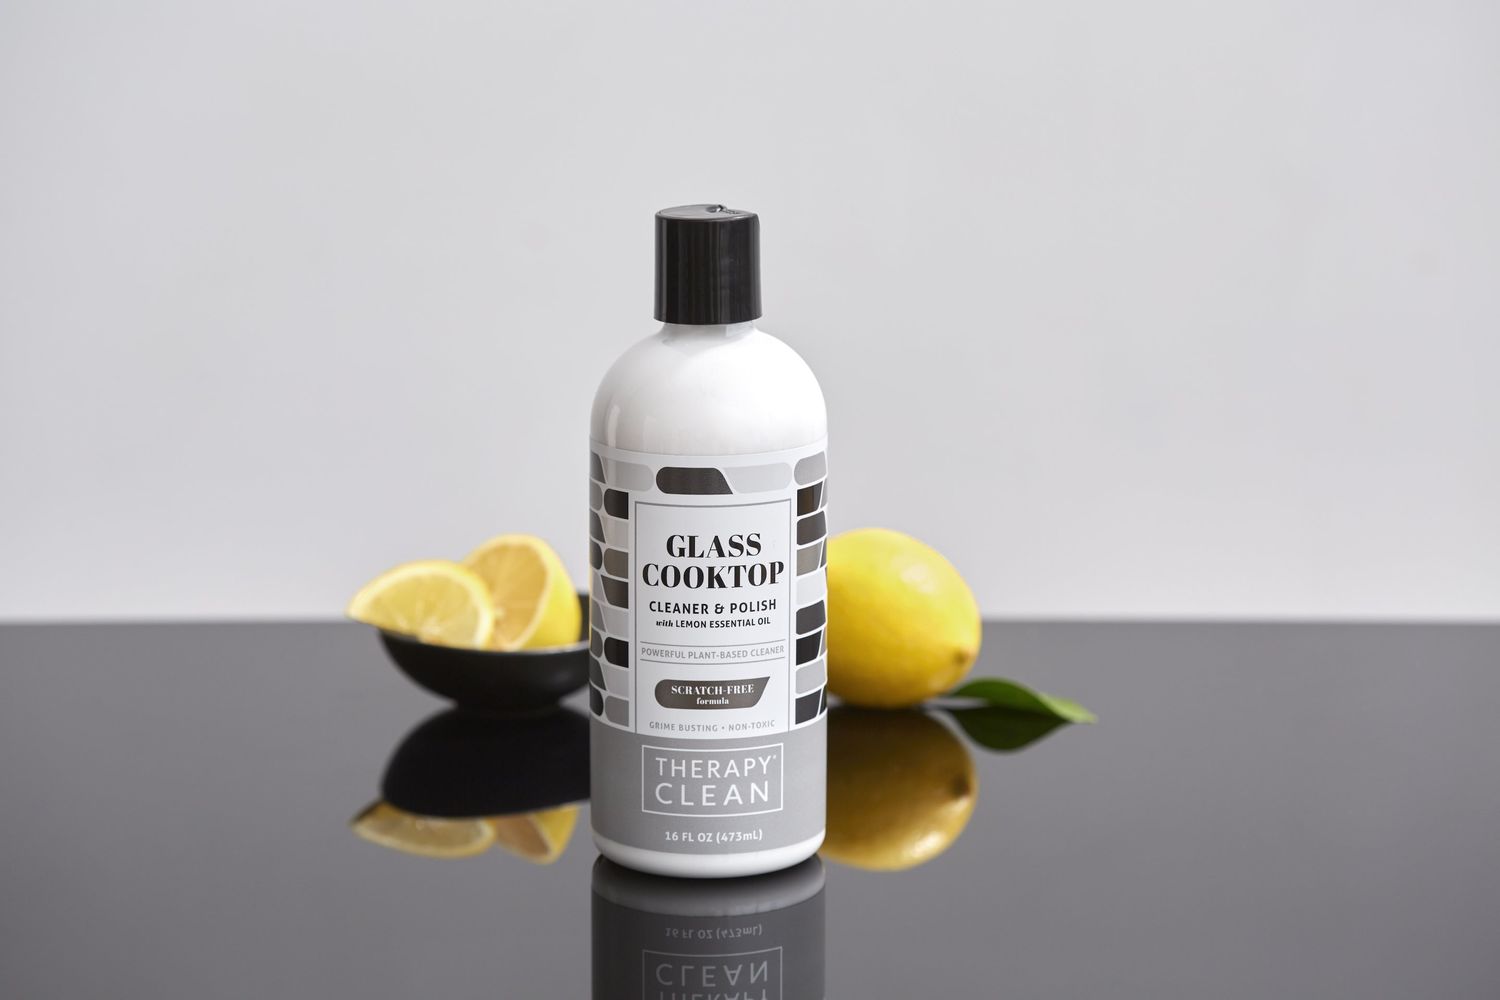 Glass Cooktop Cleaner & Polish Kit | Non toxic | recyclable packaging | Plant base Therapy Clean